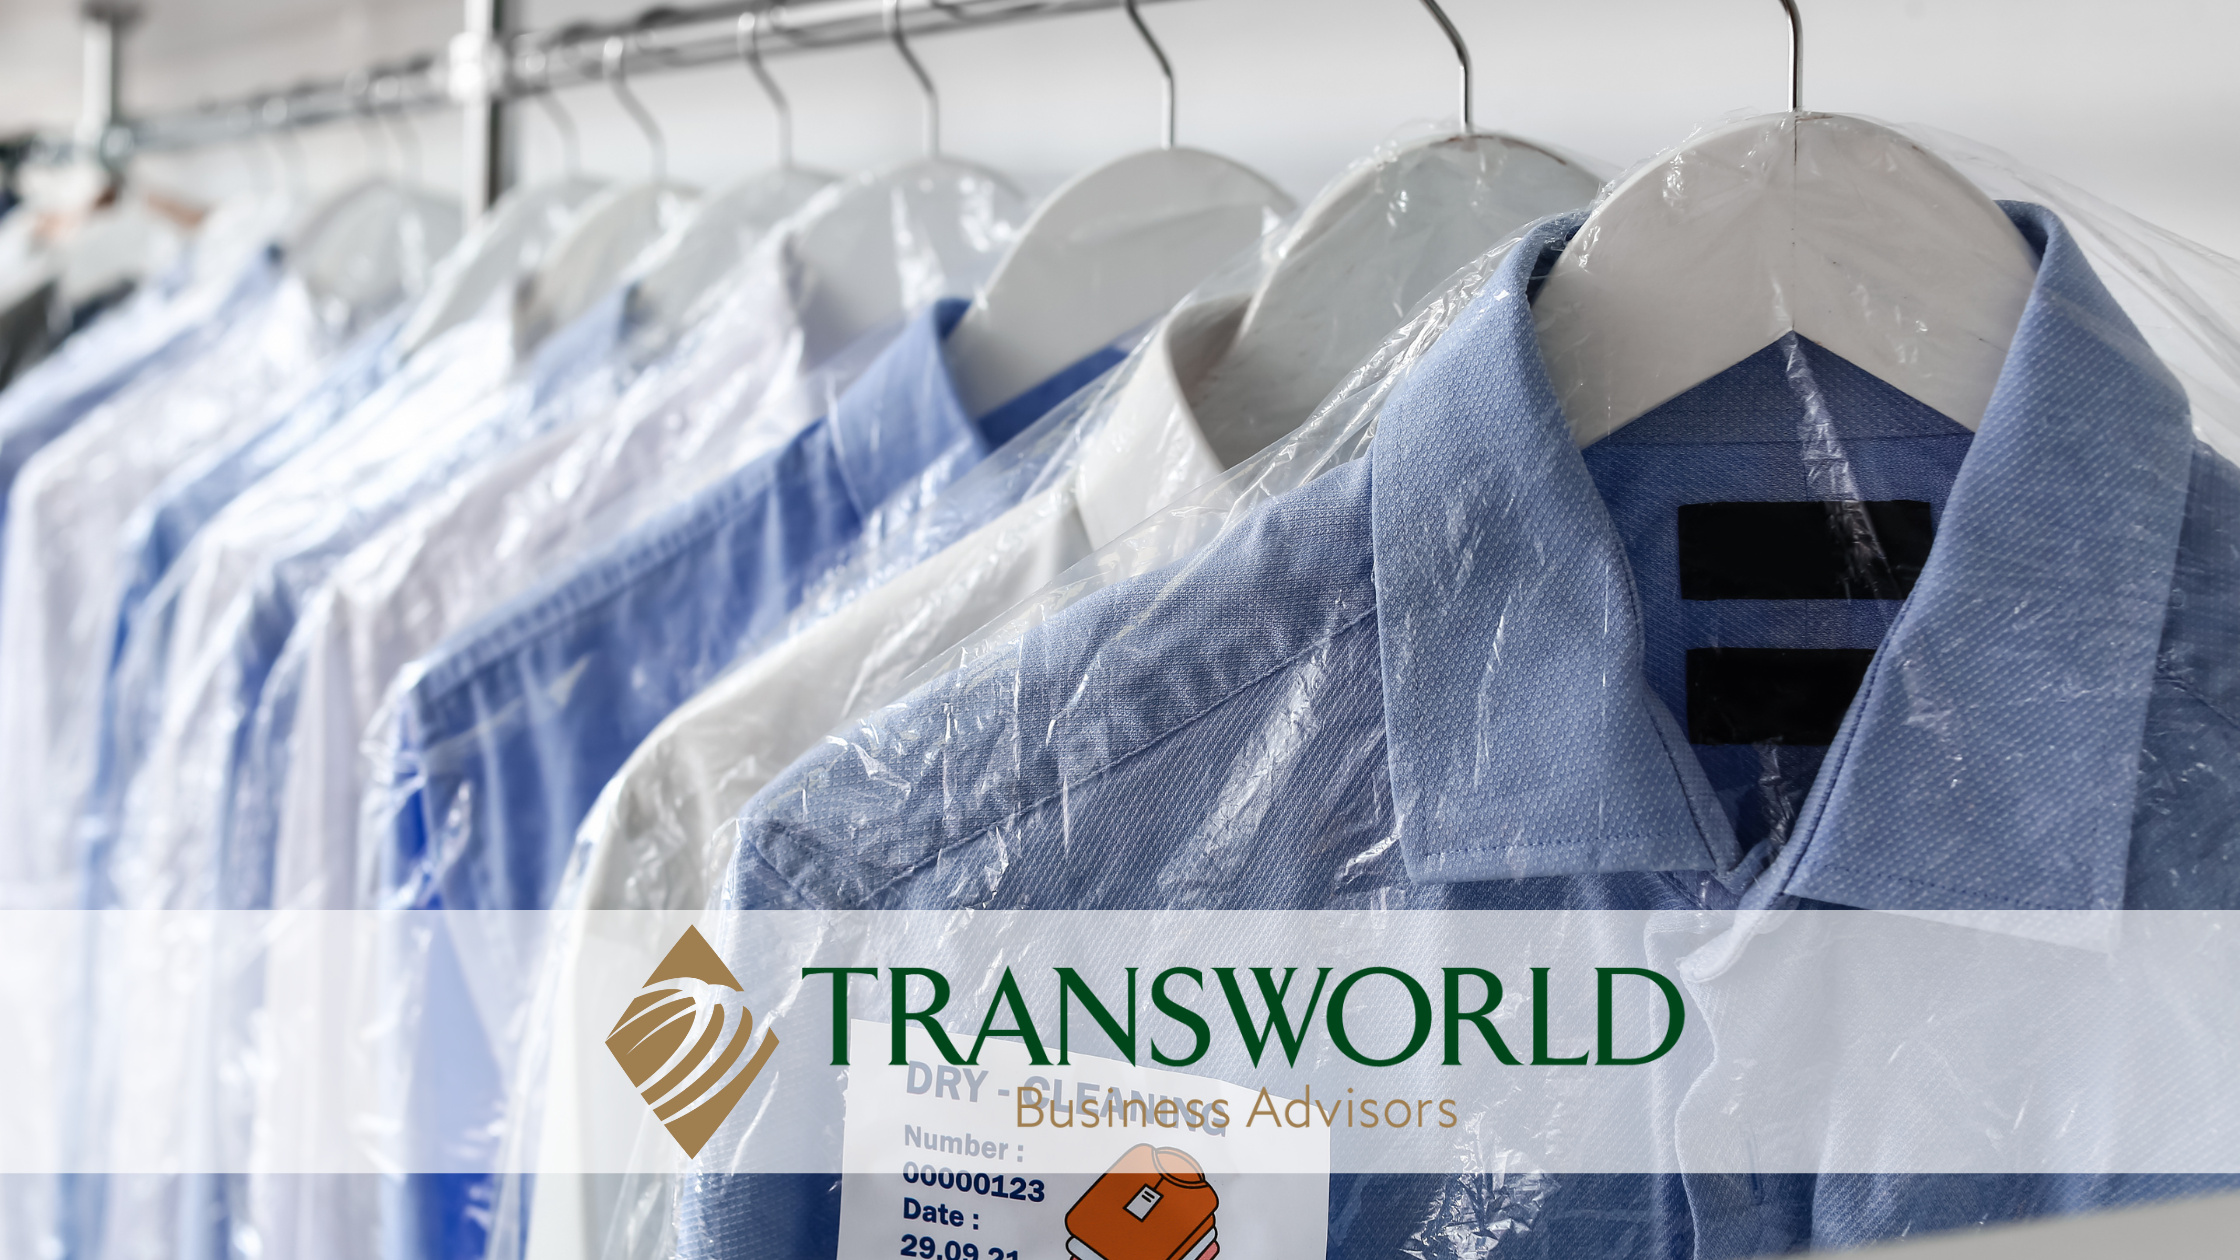 Dry Cleaning Biz with Plant on Premise Only $50,000